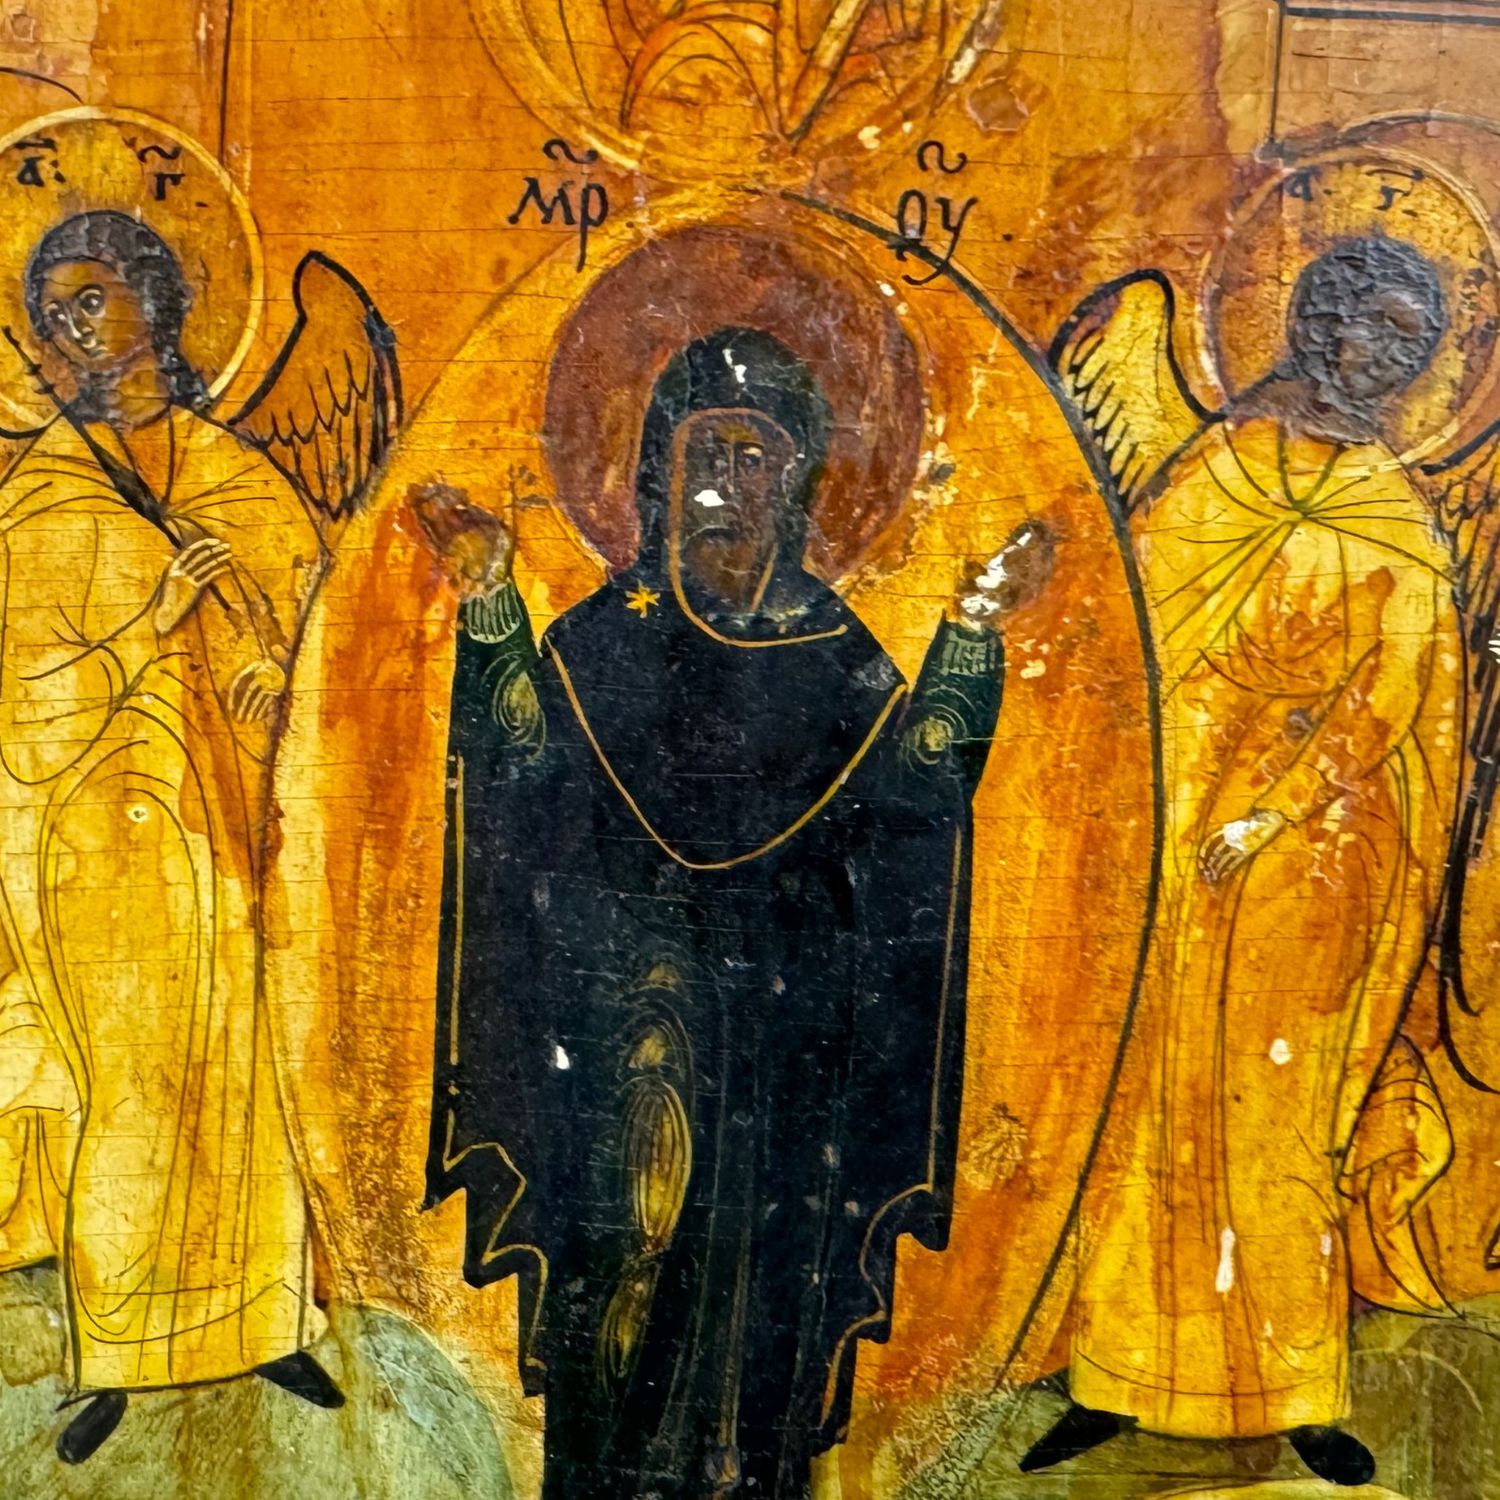 Biblical scene on a gold background - Image 6 of 11